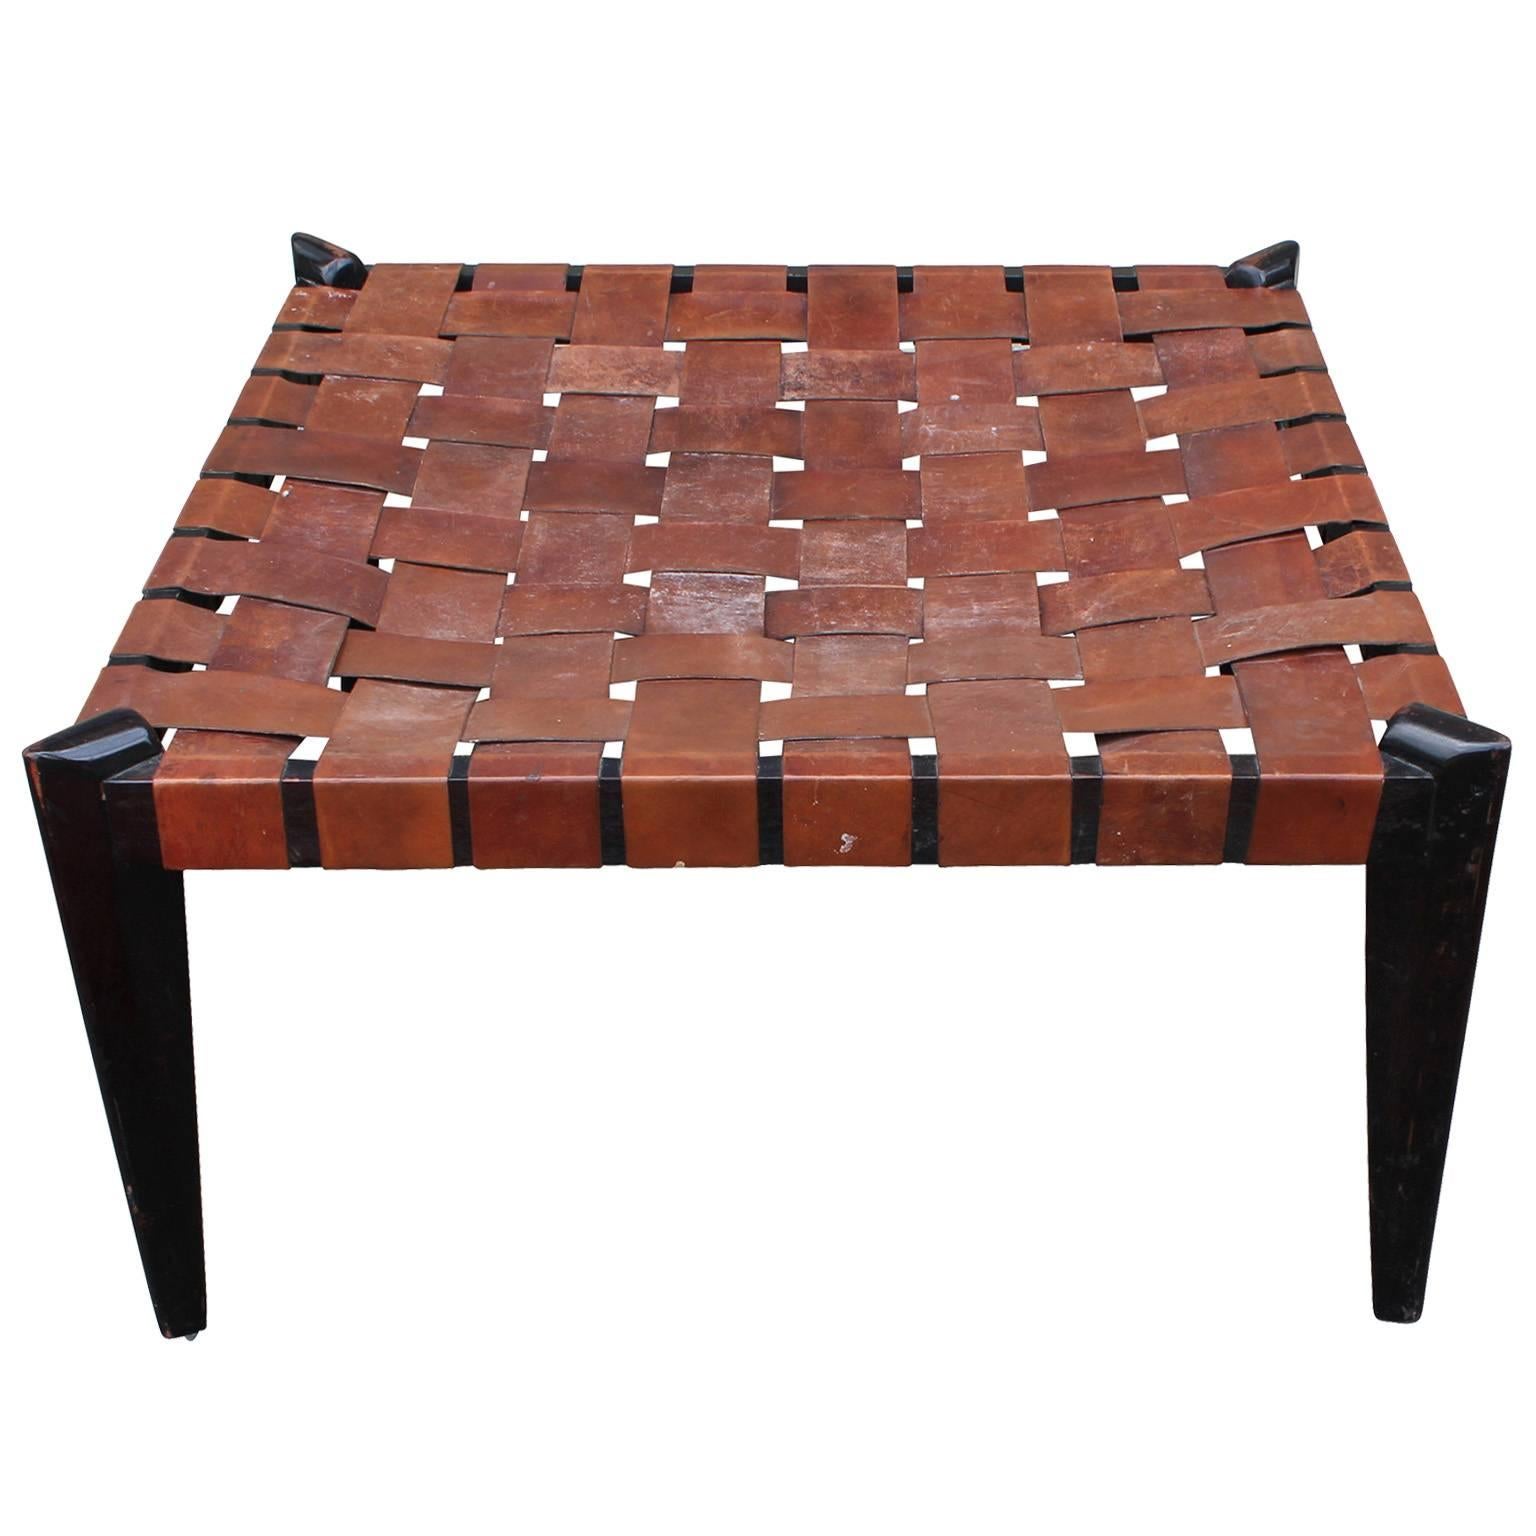 Fabulous ottoman, bench, or coffee table with a woven leather strap seat. Frame is finished in a dark almost ebony stain. Angular legs complete the piece. Perfect used as a coffee table or bench.